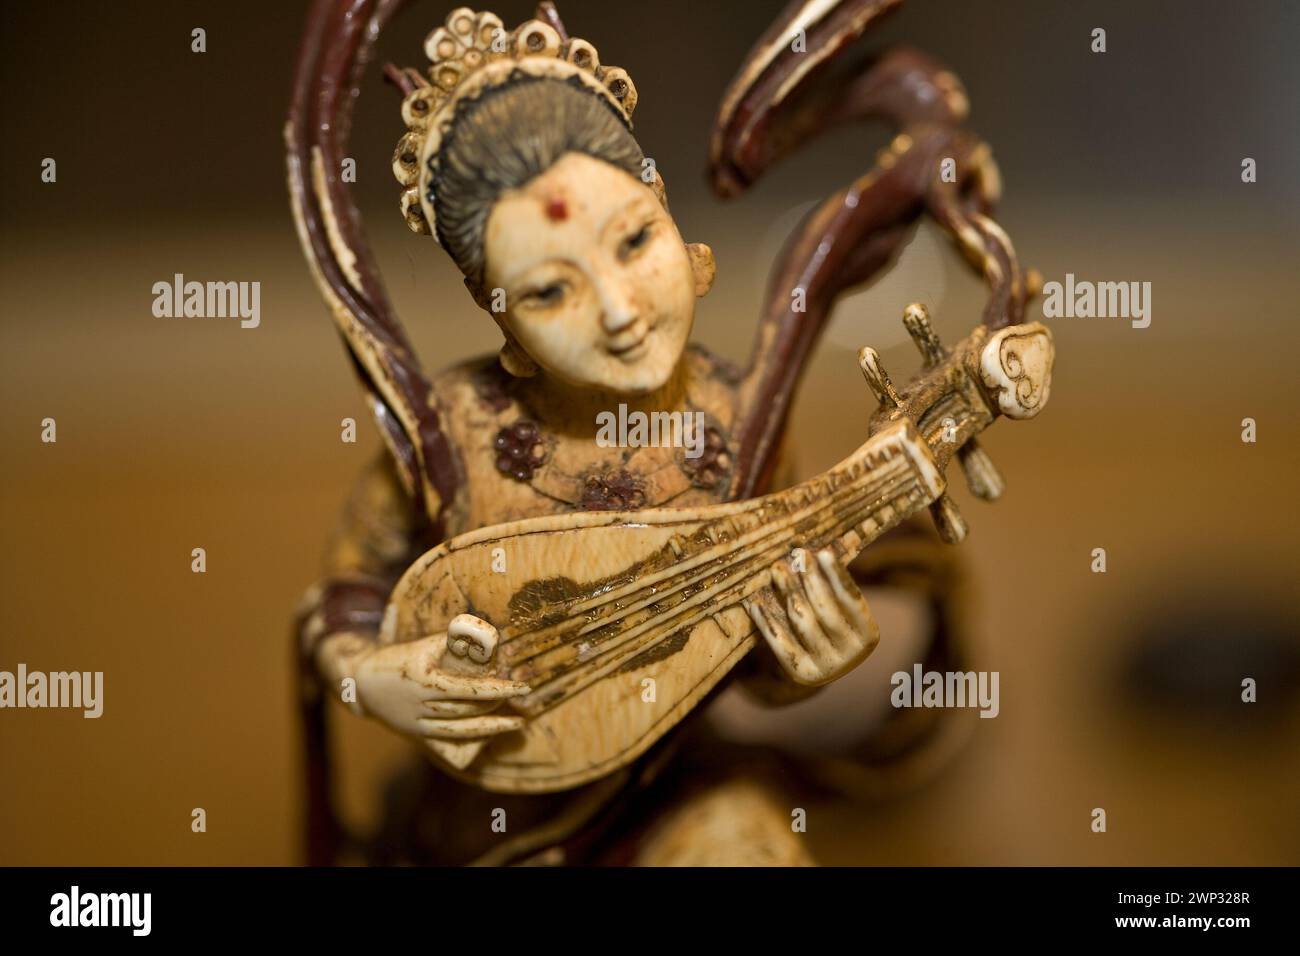 Carved ivory figurine, woman playing a pipa, traditional Chinese lute Stock Photo